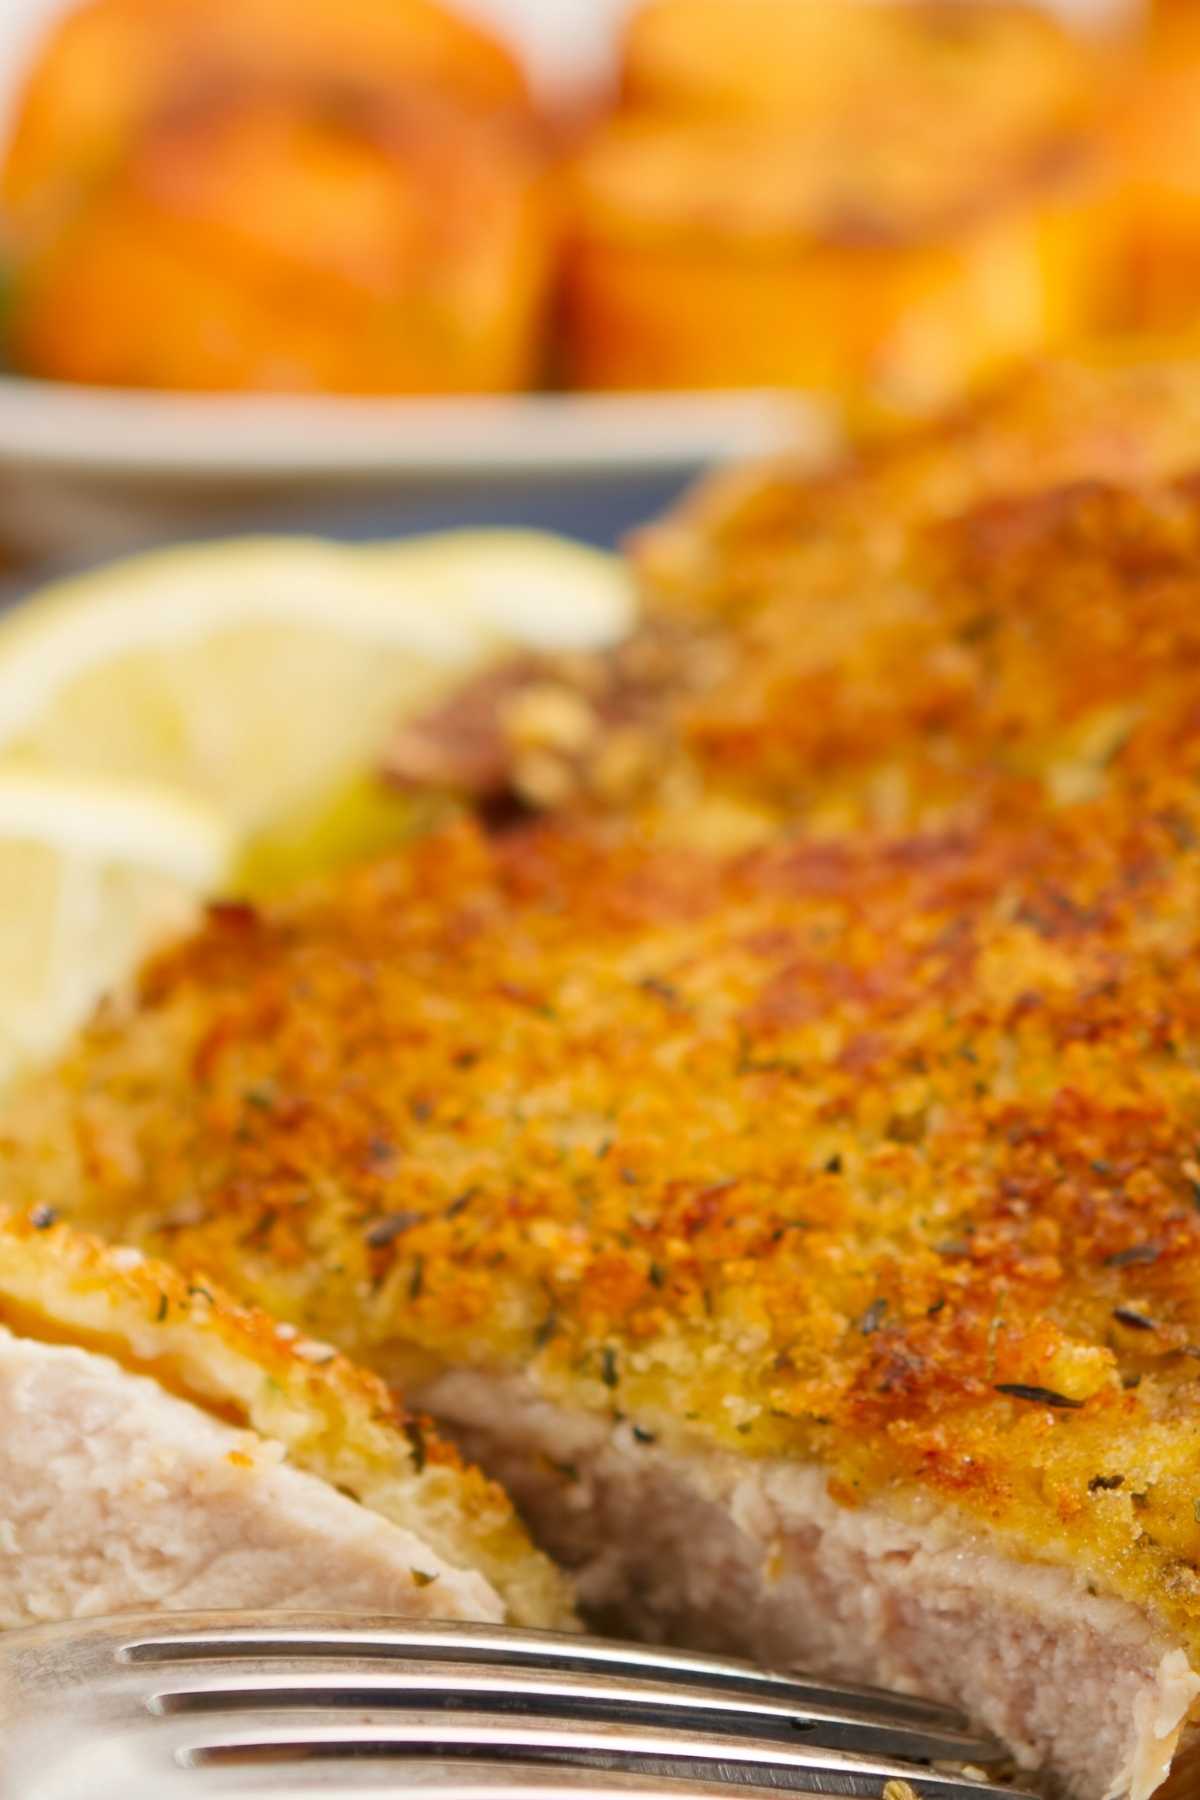 These parmesan pork chops are perfectly moist and tender on the inside and crispy on the outside. They’re super easy to make and are ready to eat in under an hour.